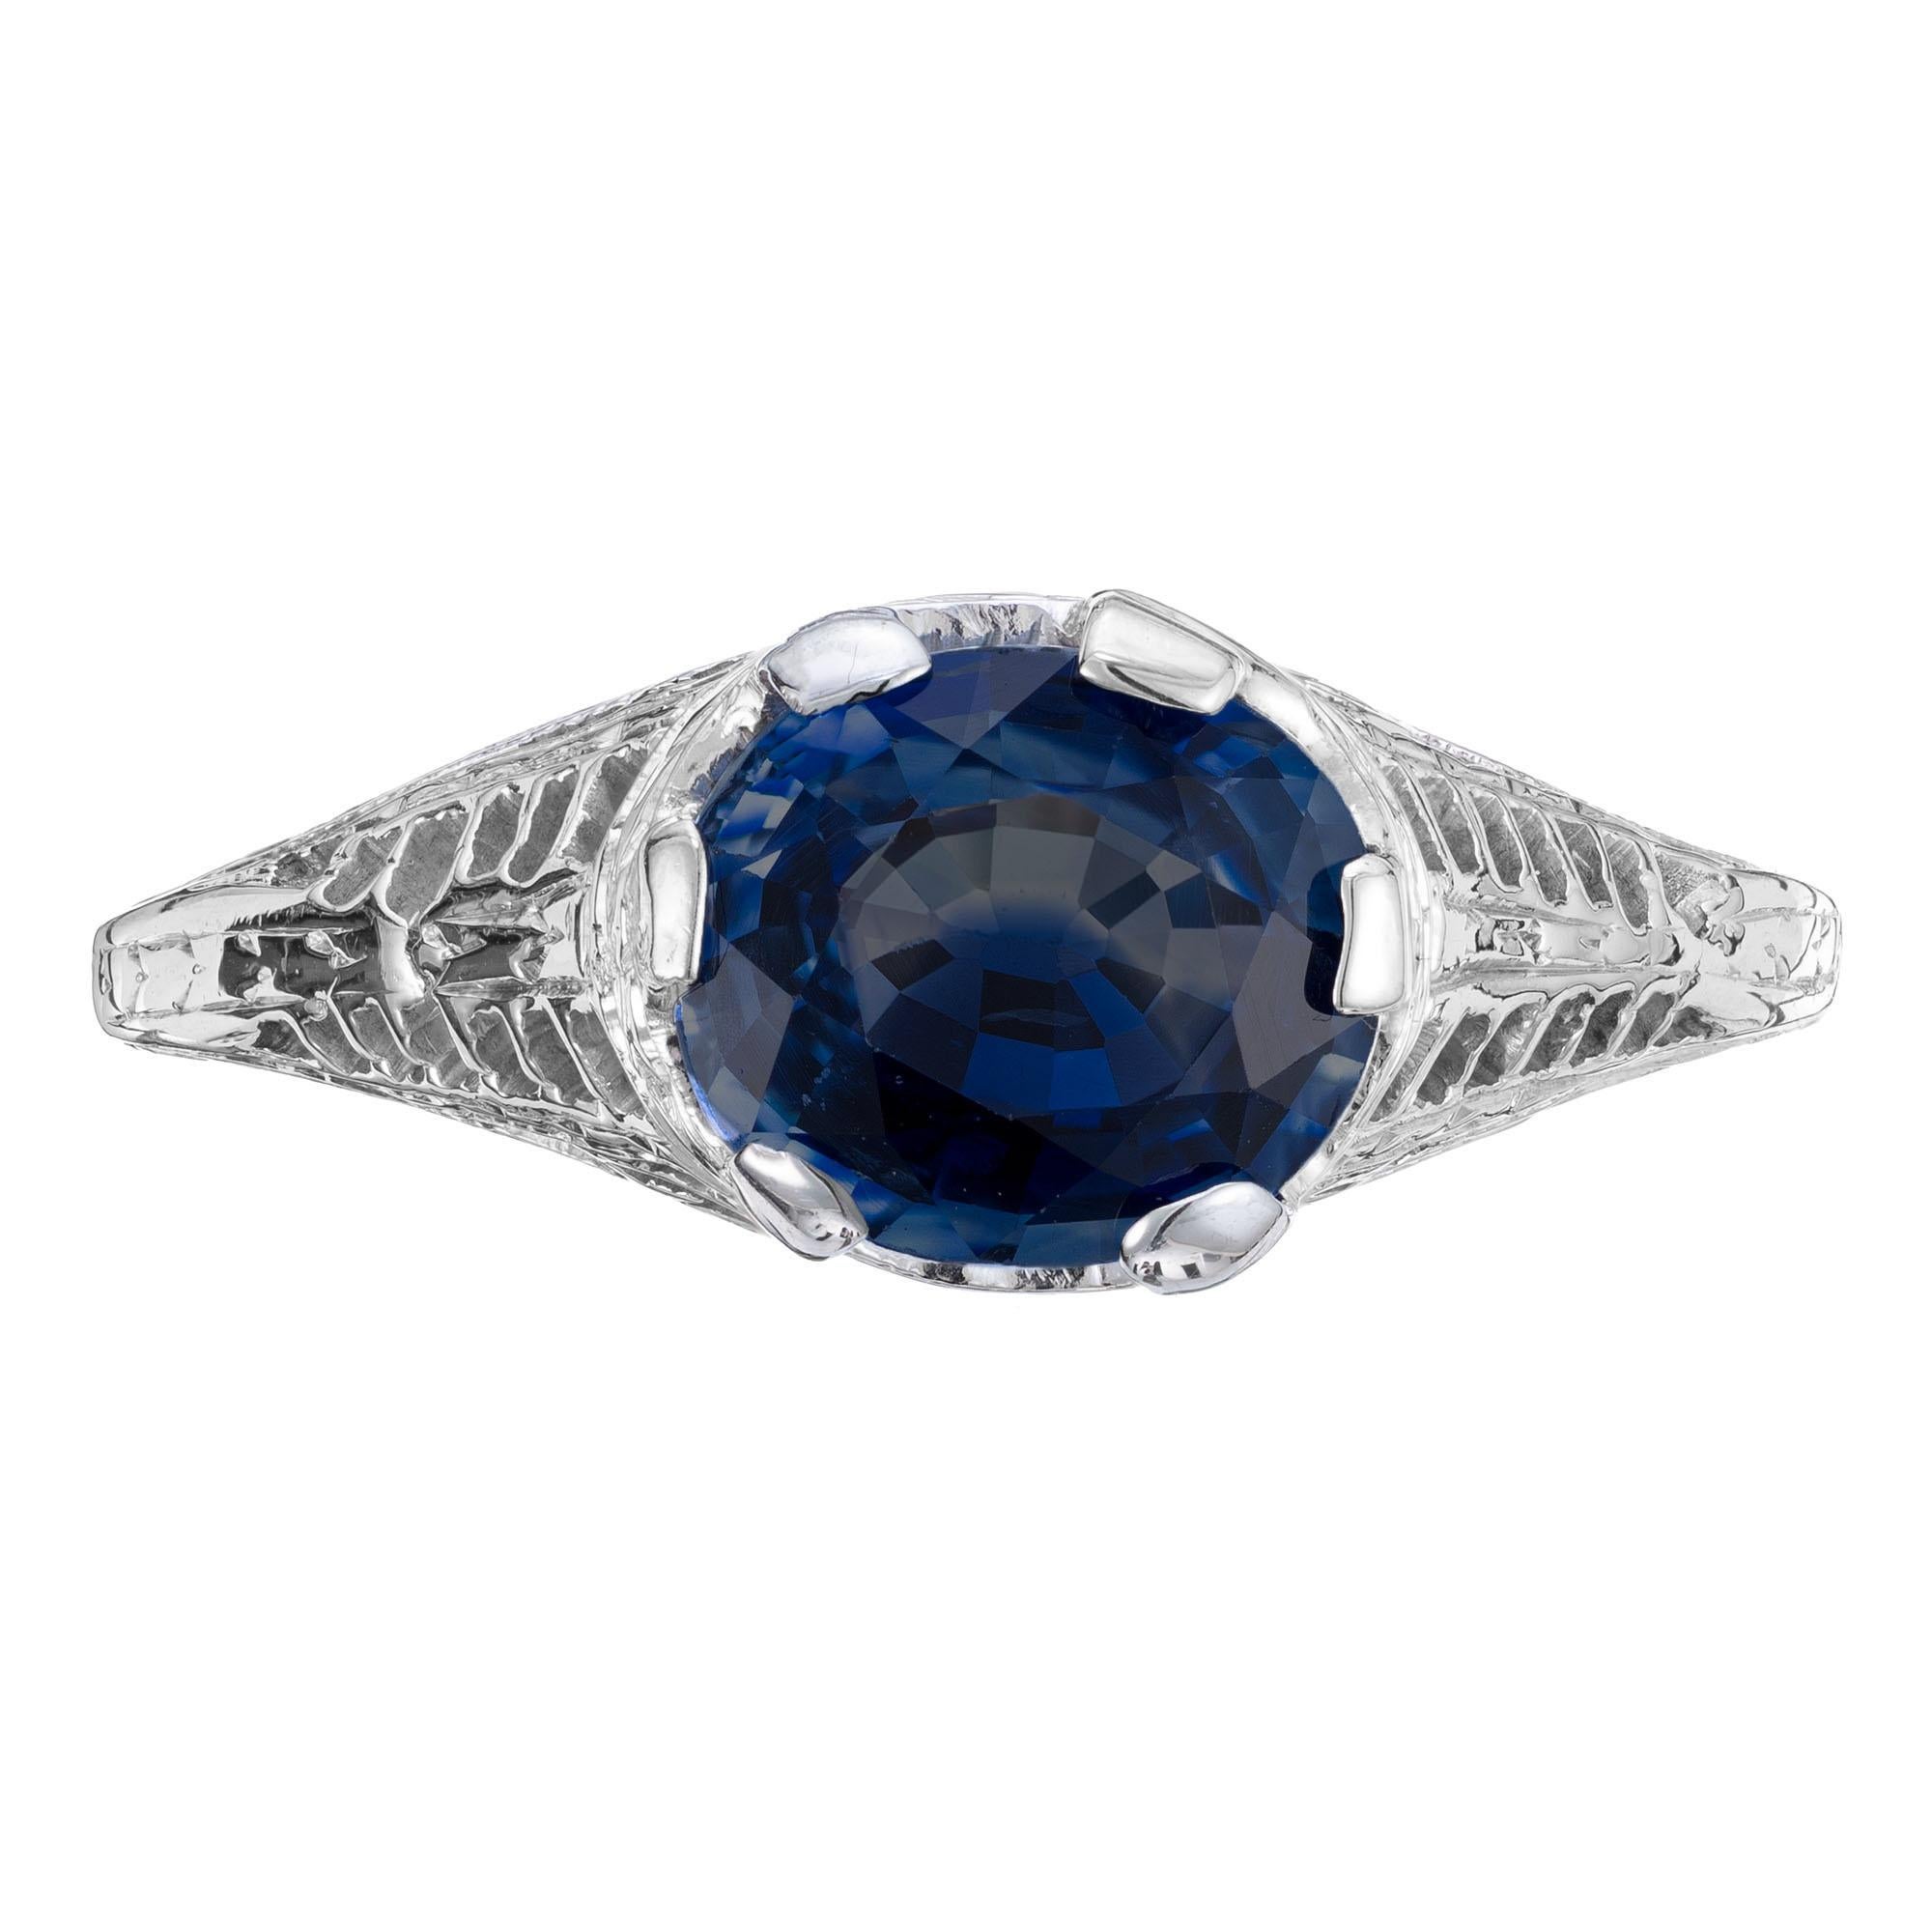 1930's Art Deco sapphire engagement ring. GIA certified as simple heat only, this oval brilliant cut 1.77ct sapphire is mounted sideways in a 14k white gold detailed filigree setting. The sapphire is a rich deep blue, it is secured with with six